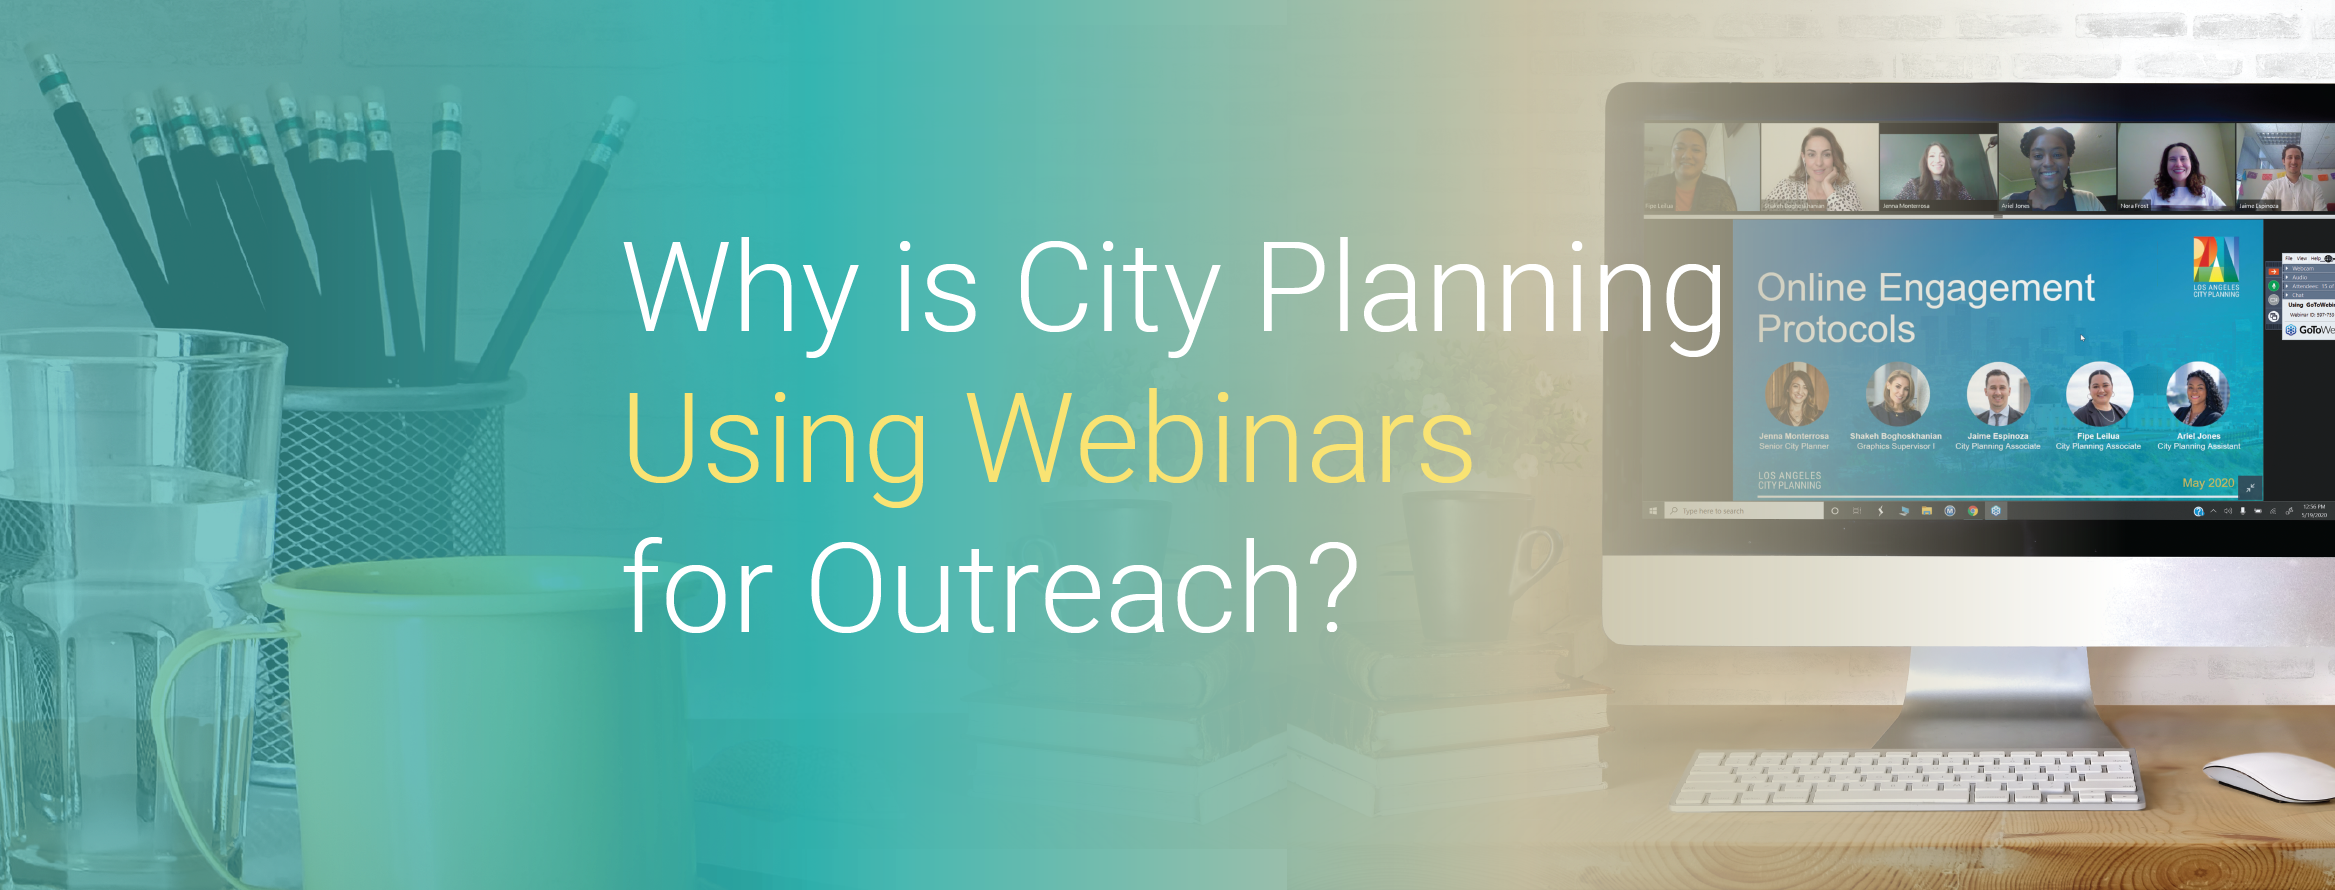 Why Is City Planning Using Webinars for Outreach? 